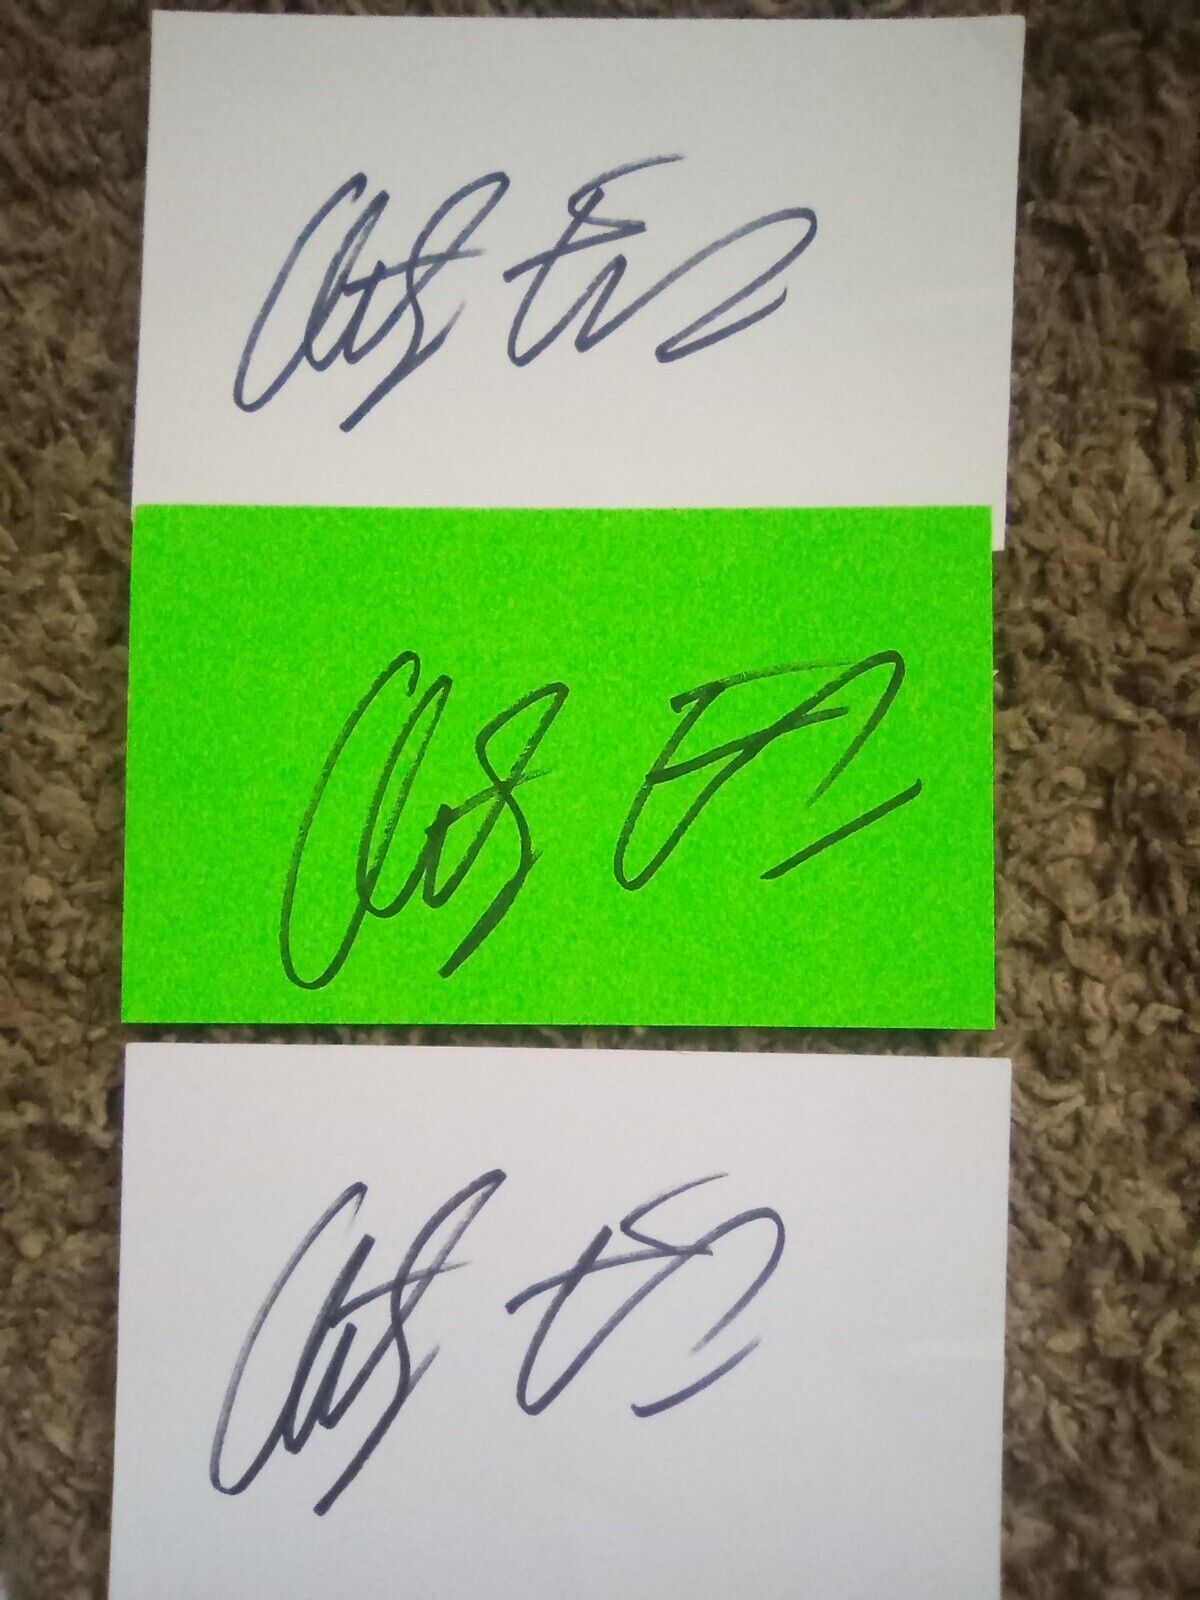 3 Anthony Edwards Top Gun Autographs 3 Signed Cards